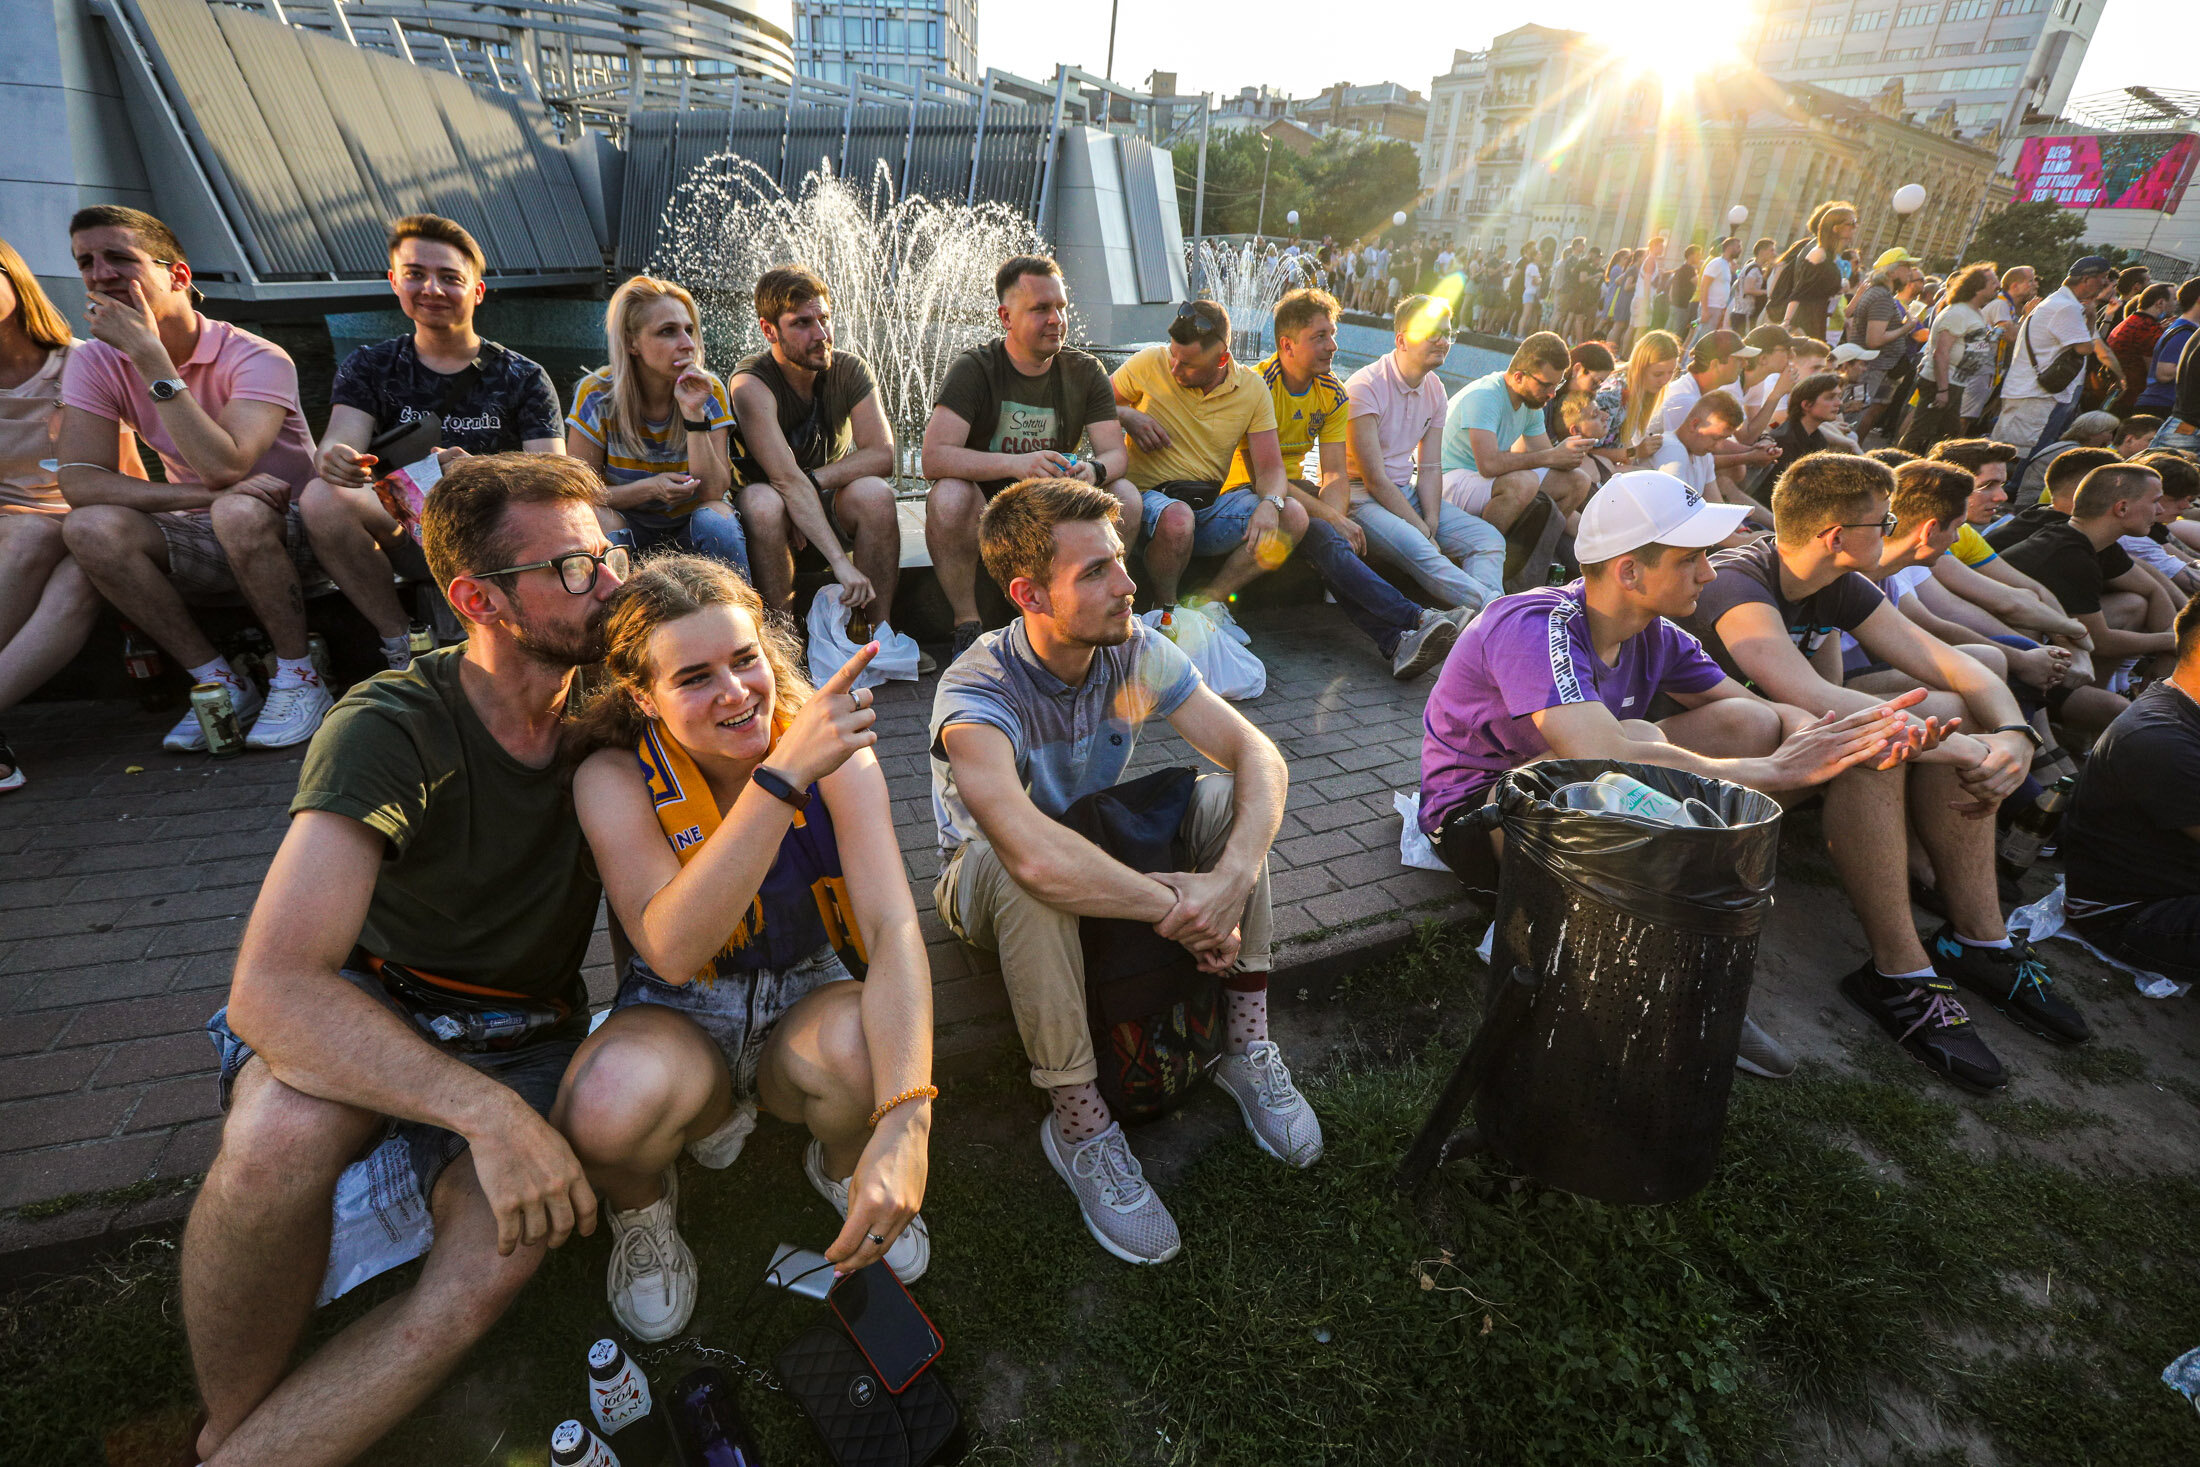 Ukrainian supporters watch the  UEFA EURO 2020 Group C football match between Ukraine and Austria on a giant screen in the center of Kyiv on June 21, 2021.